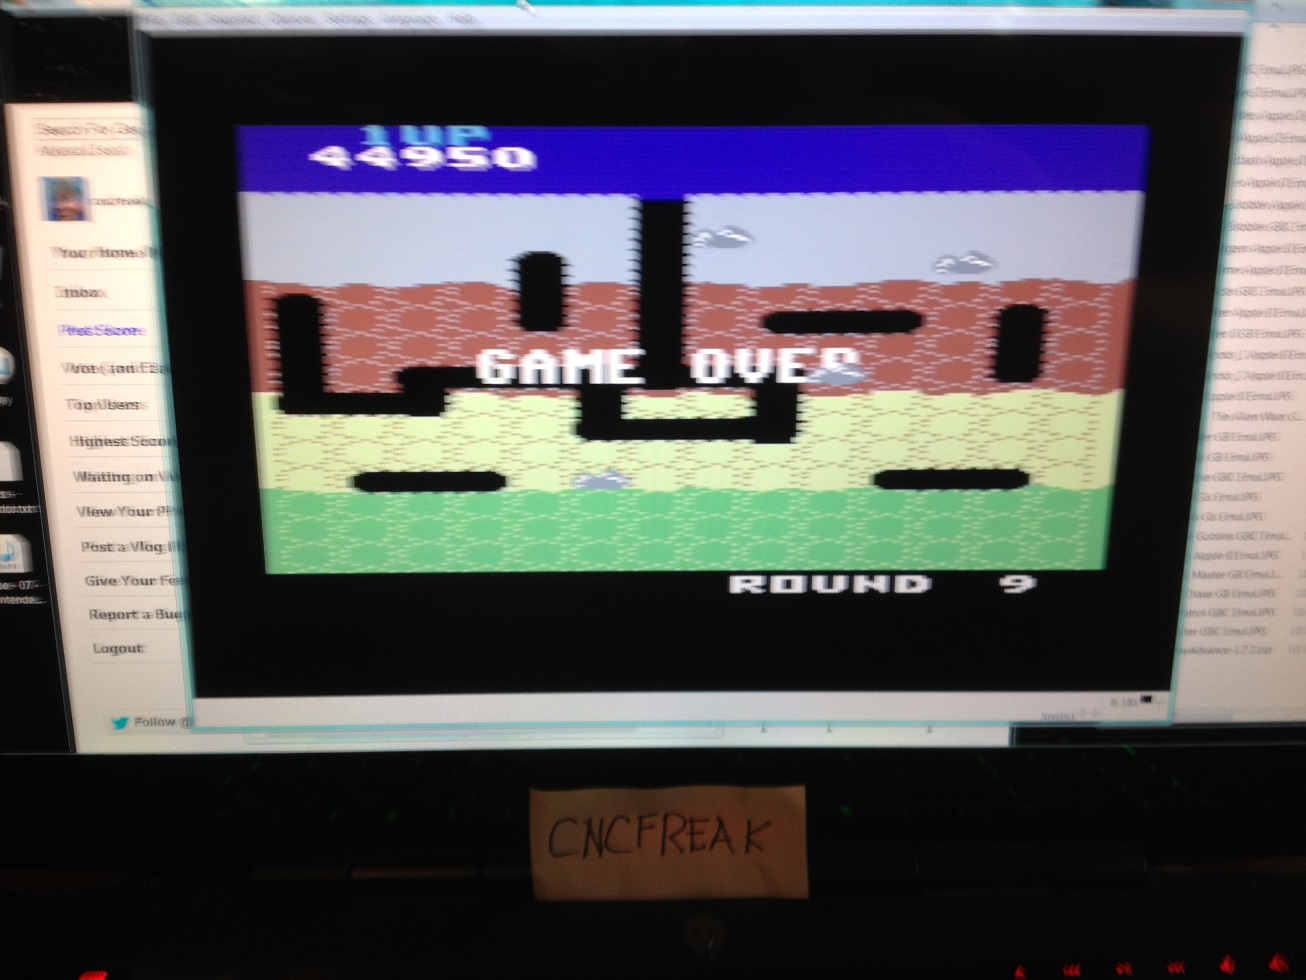 cncfreak: Dig Dug (Commodore 64 Emulated) 44,950 points on 2013-10-03 16:53:10